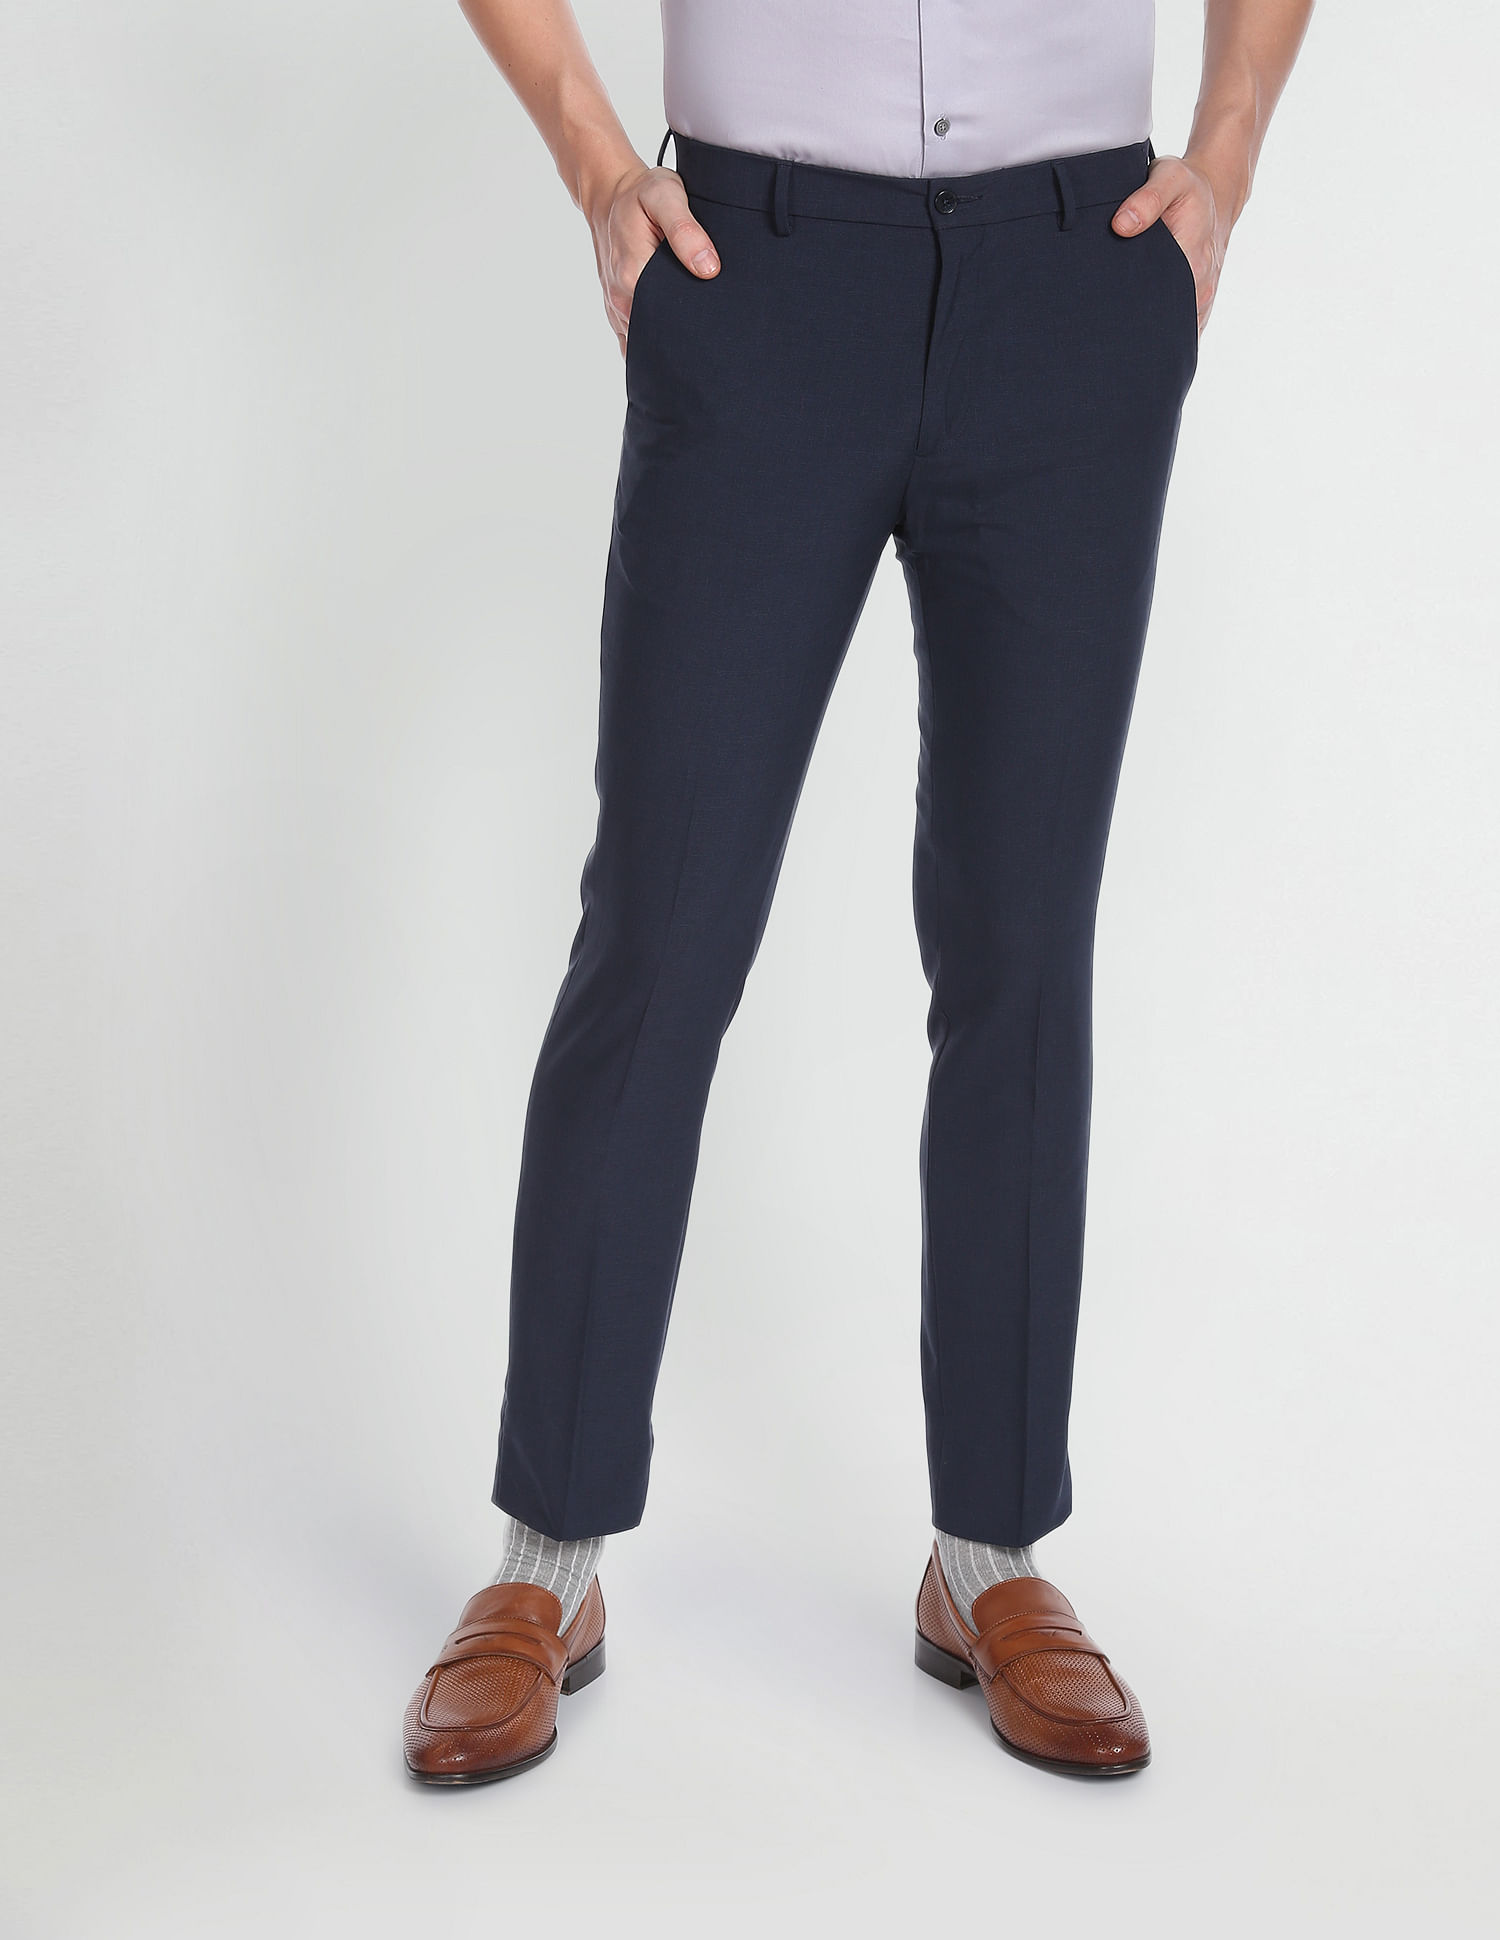 Decible Polyster Blend FormalTrousers For Man |formal grey pants | pant  trousers for men office